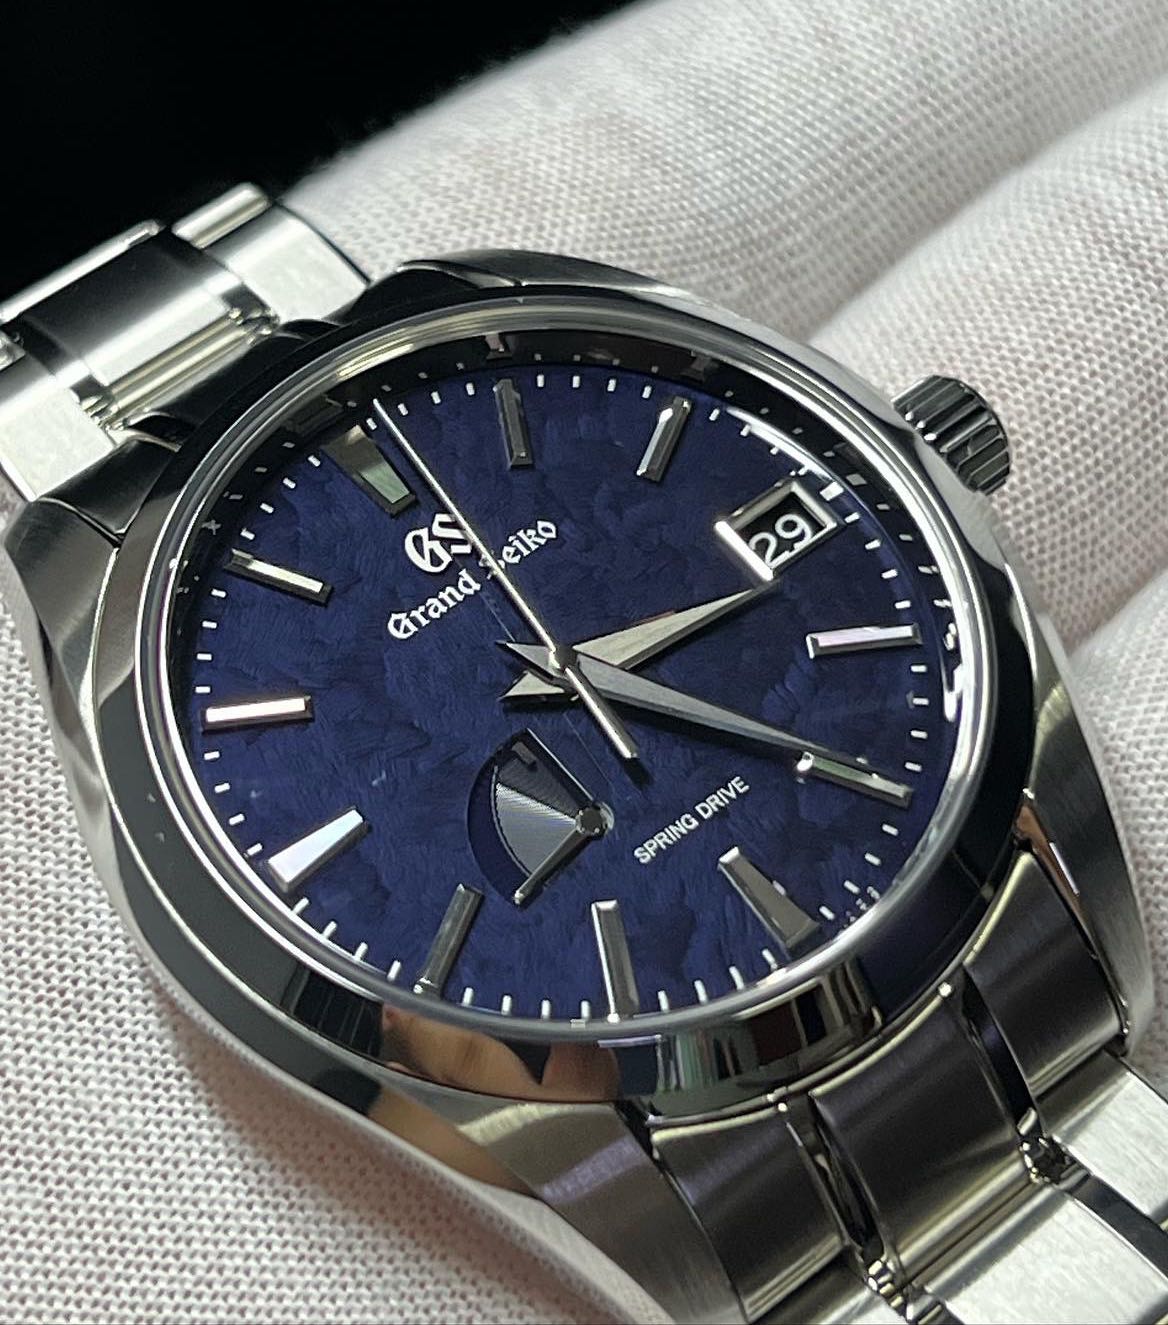 Grand seiko heritage collection online exclusive SBGA469, Men's Fashion,  Watches & Accessories, Watches on Carousell